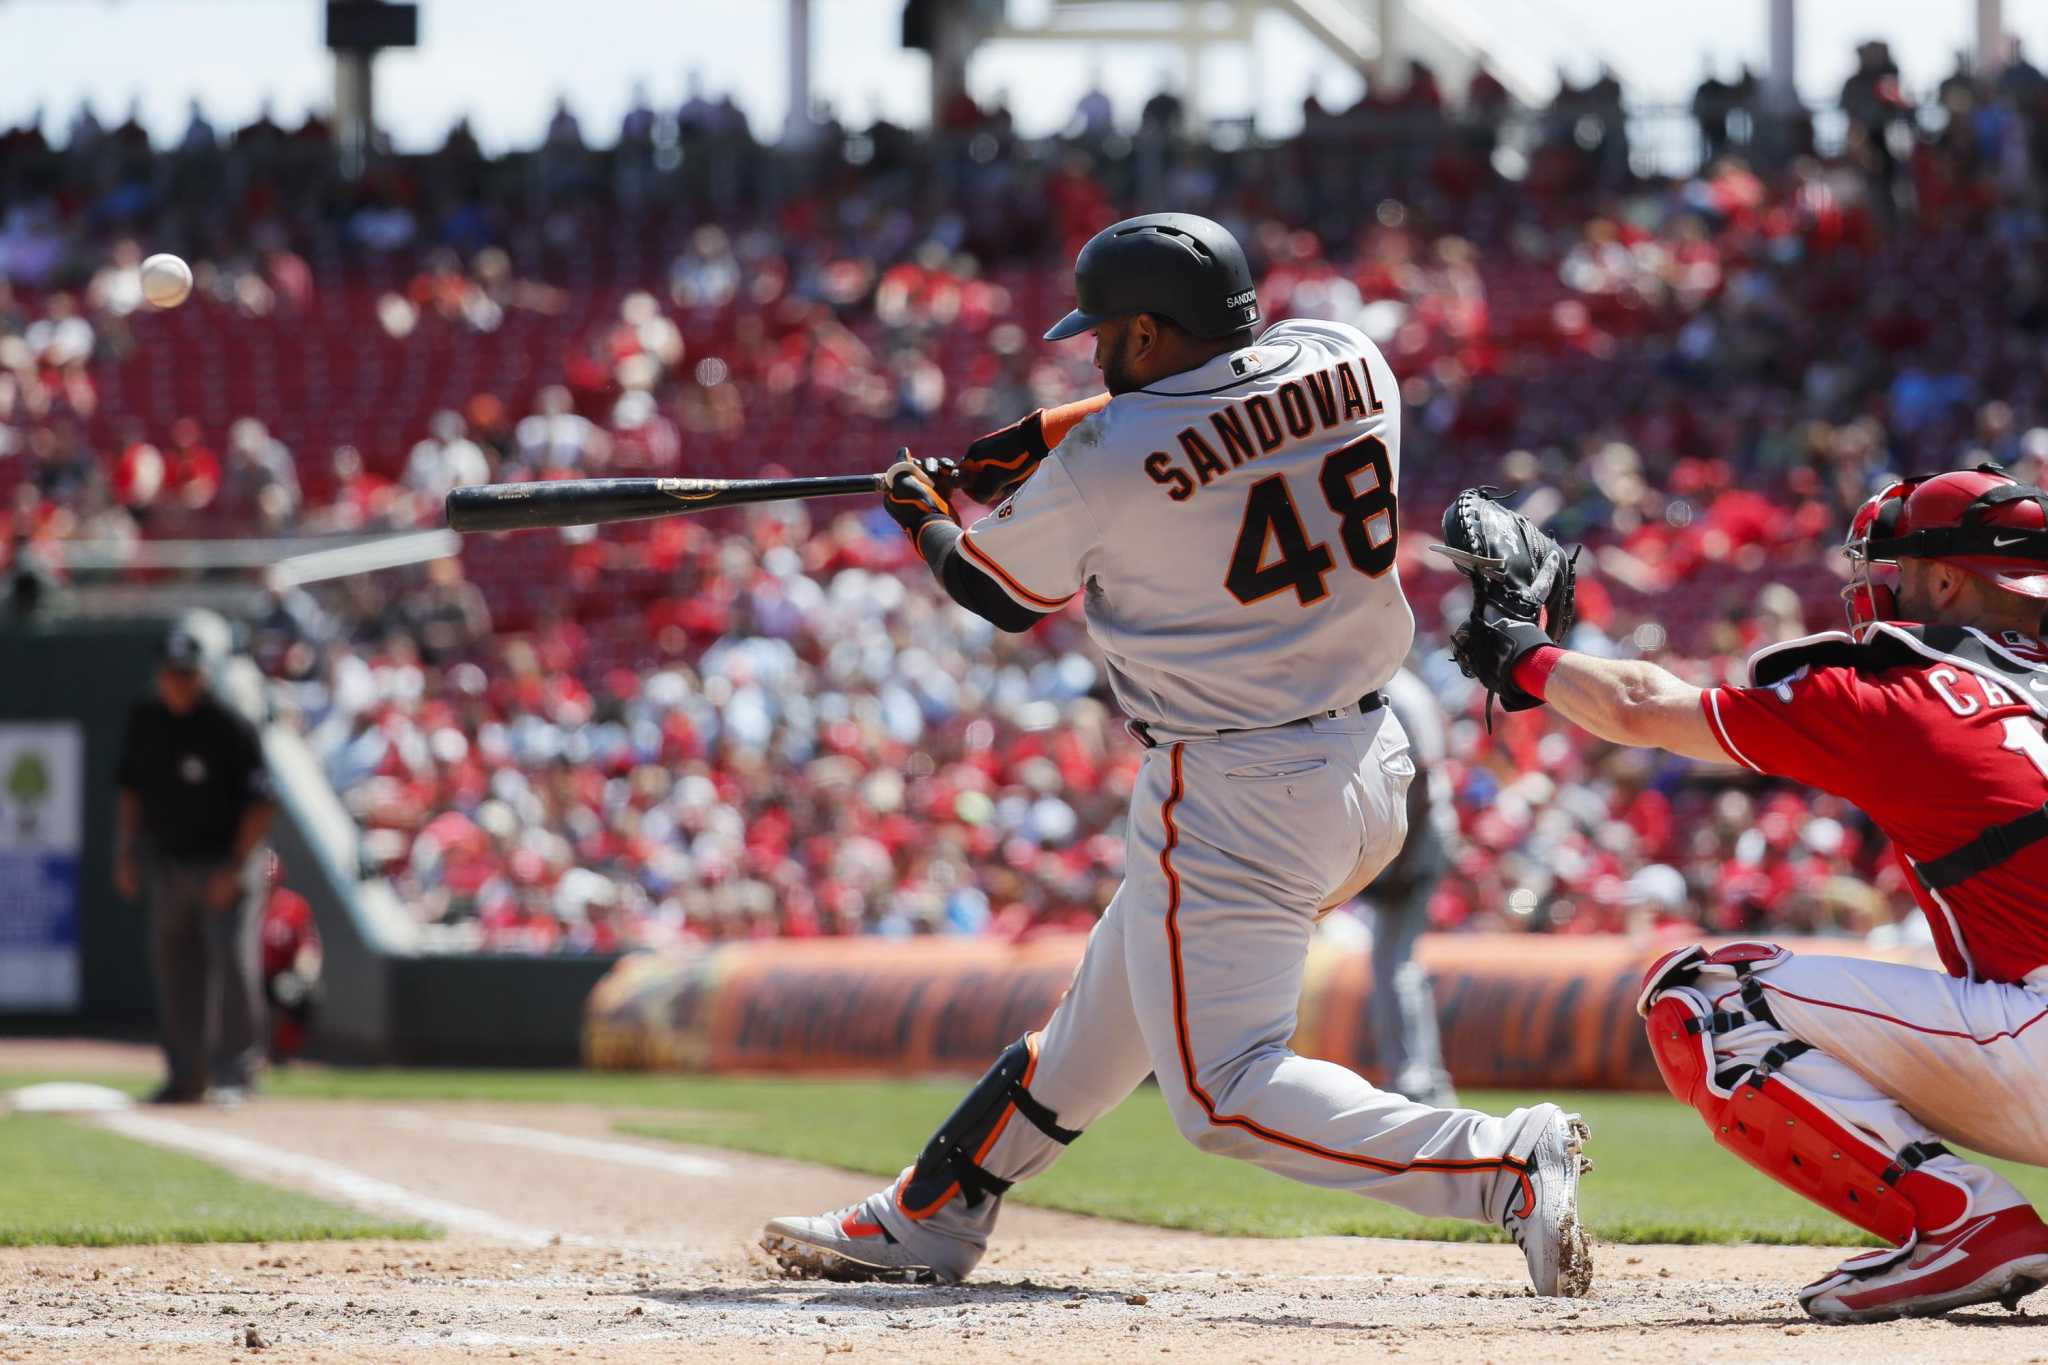 Pablo Sandoval makes history in Giants' loss: pitching, homering, stealing